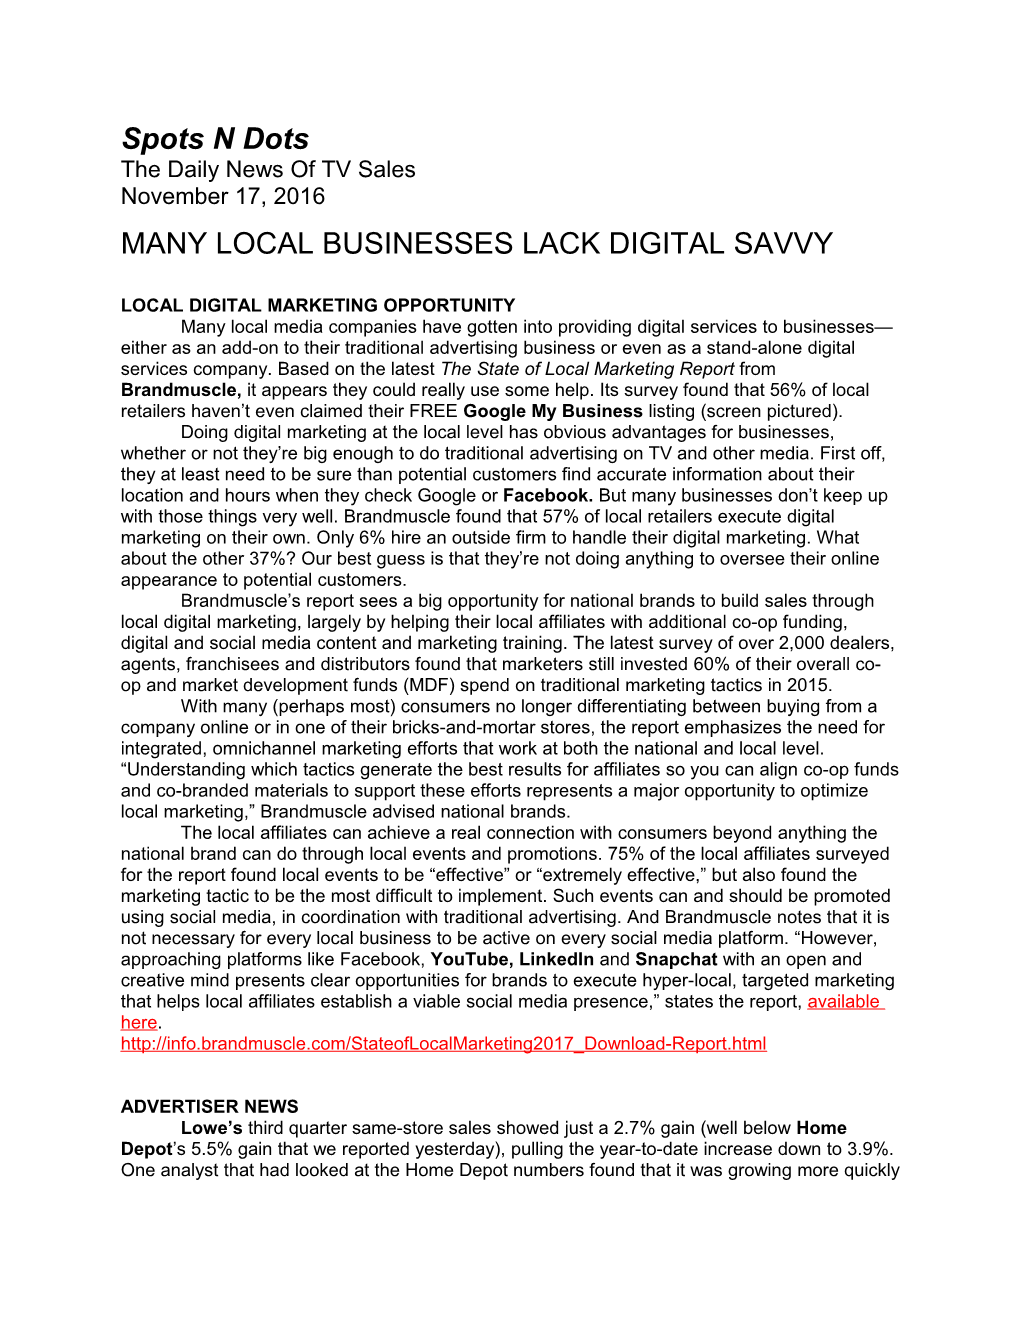 Many Local Businesses Lack Digital Savvy